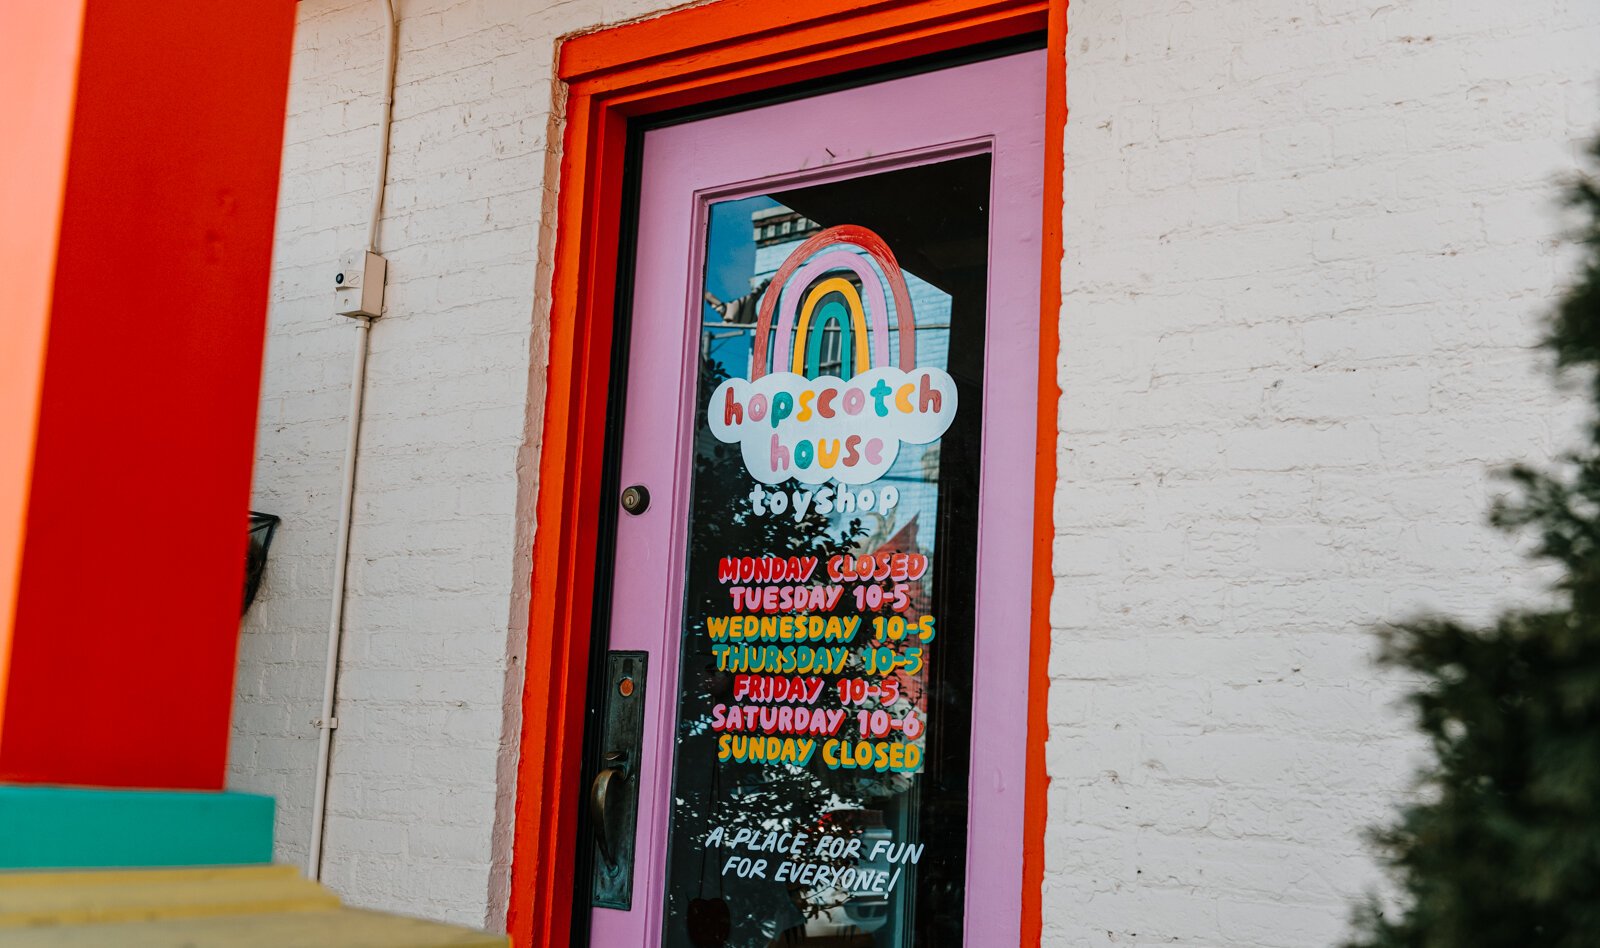 Justin Lim, owner of Old 5 and Dime Sign Co., hand painted the door at Hopscotch House on Broadway in Fort Wayne, IN.